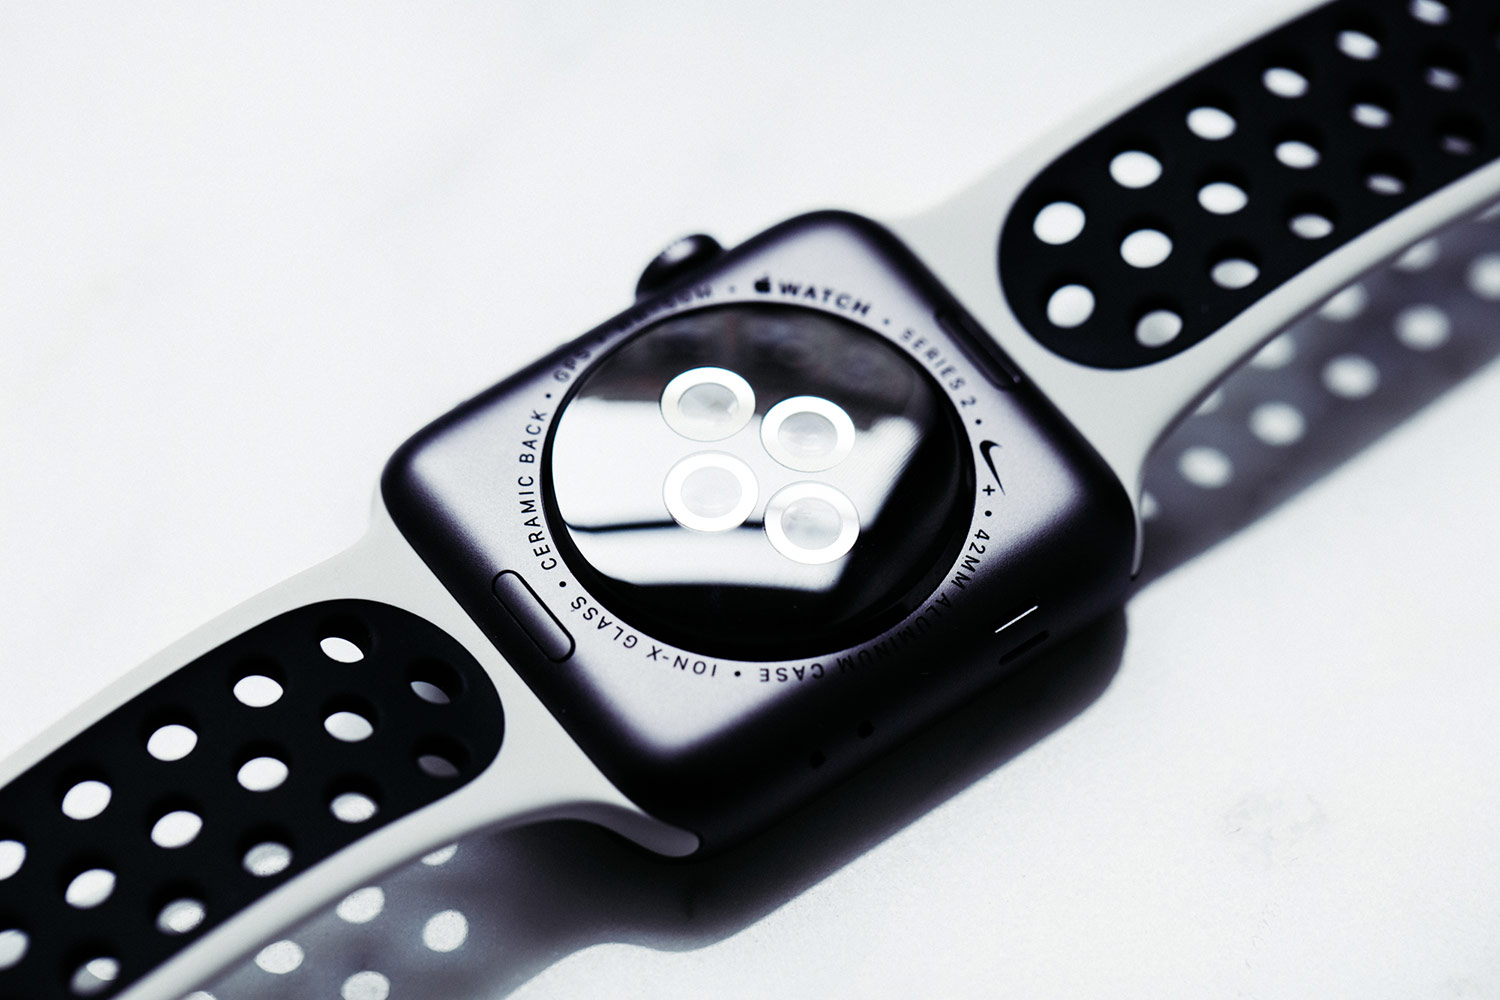 Apple Watch Control Center customization and other new features in watchOS 5 were presented during the WWDC 2018 keynote